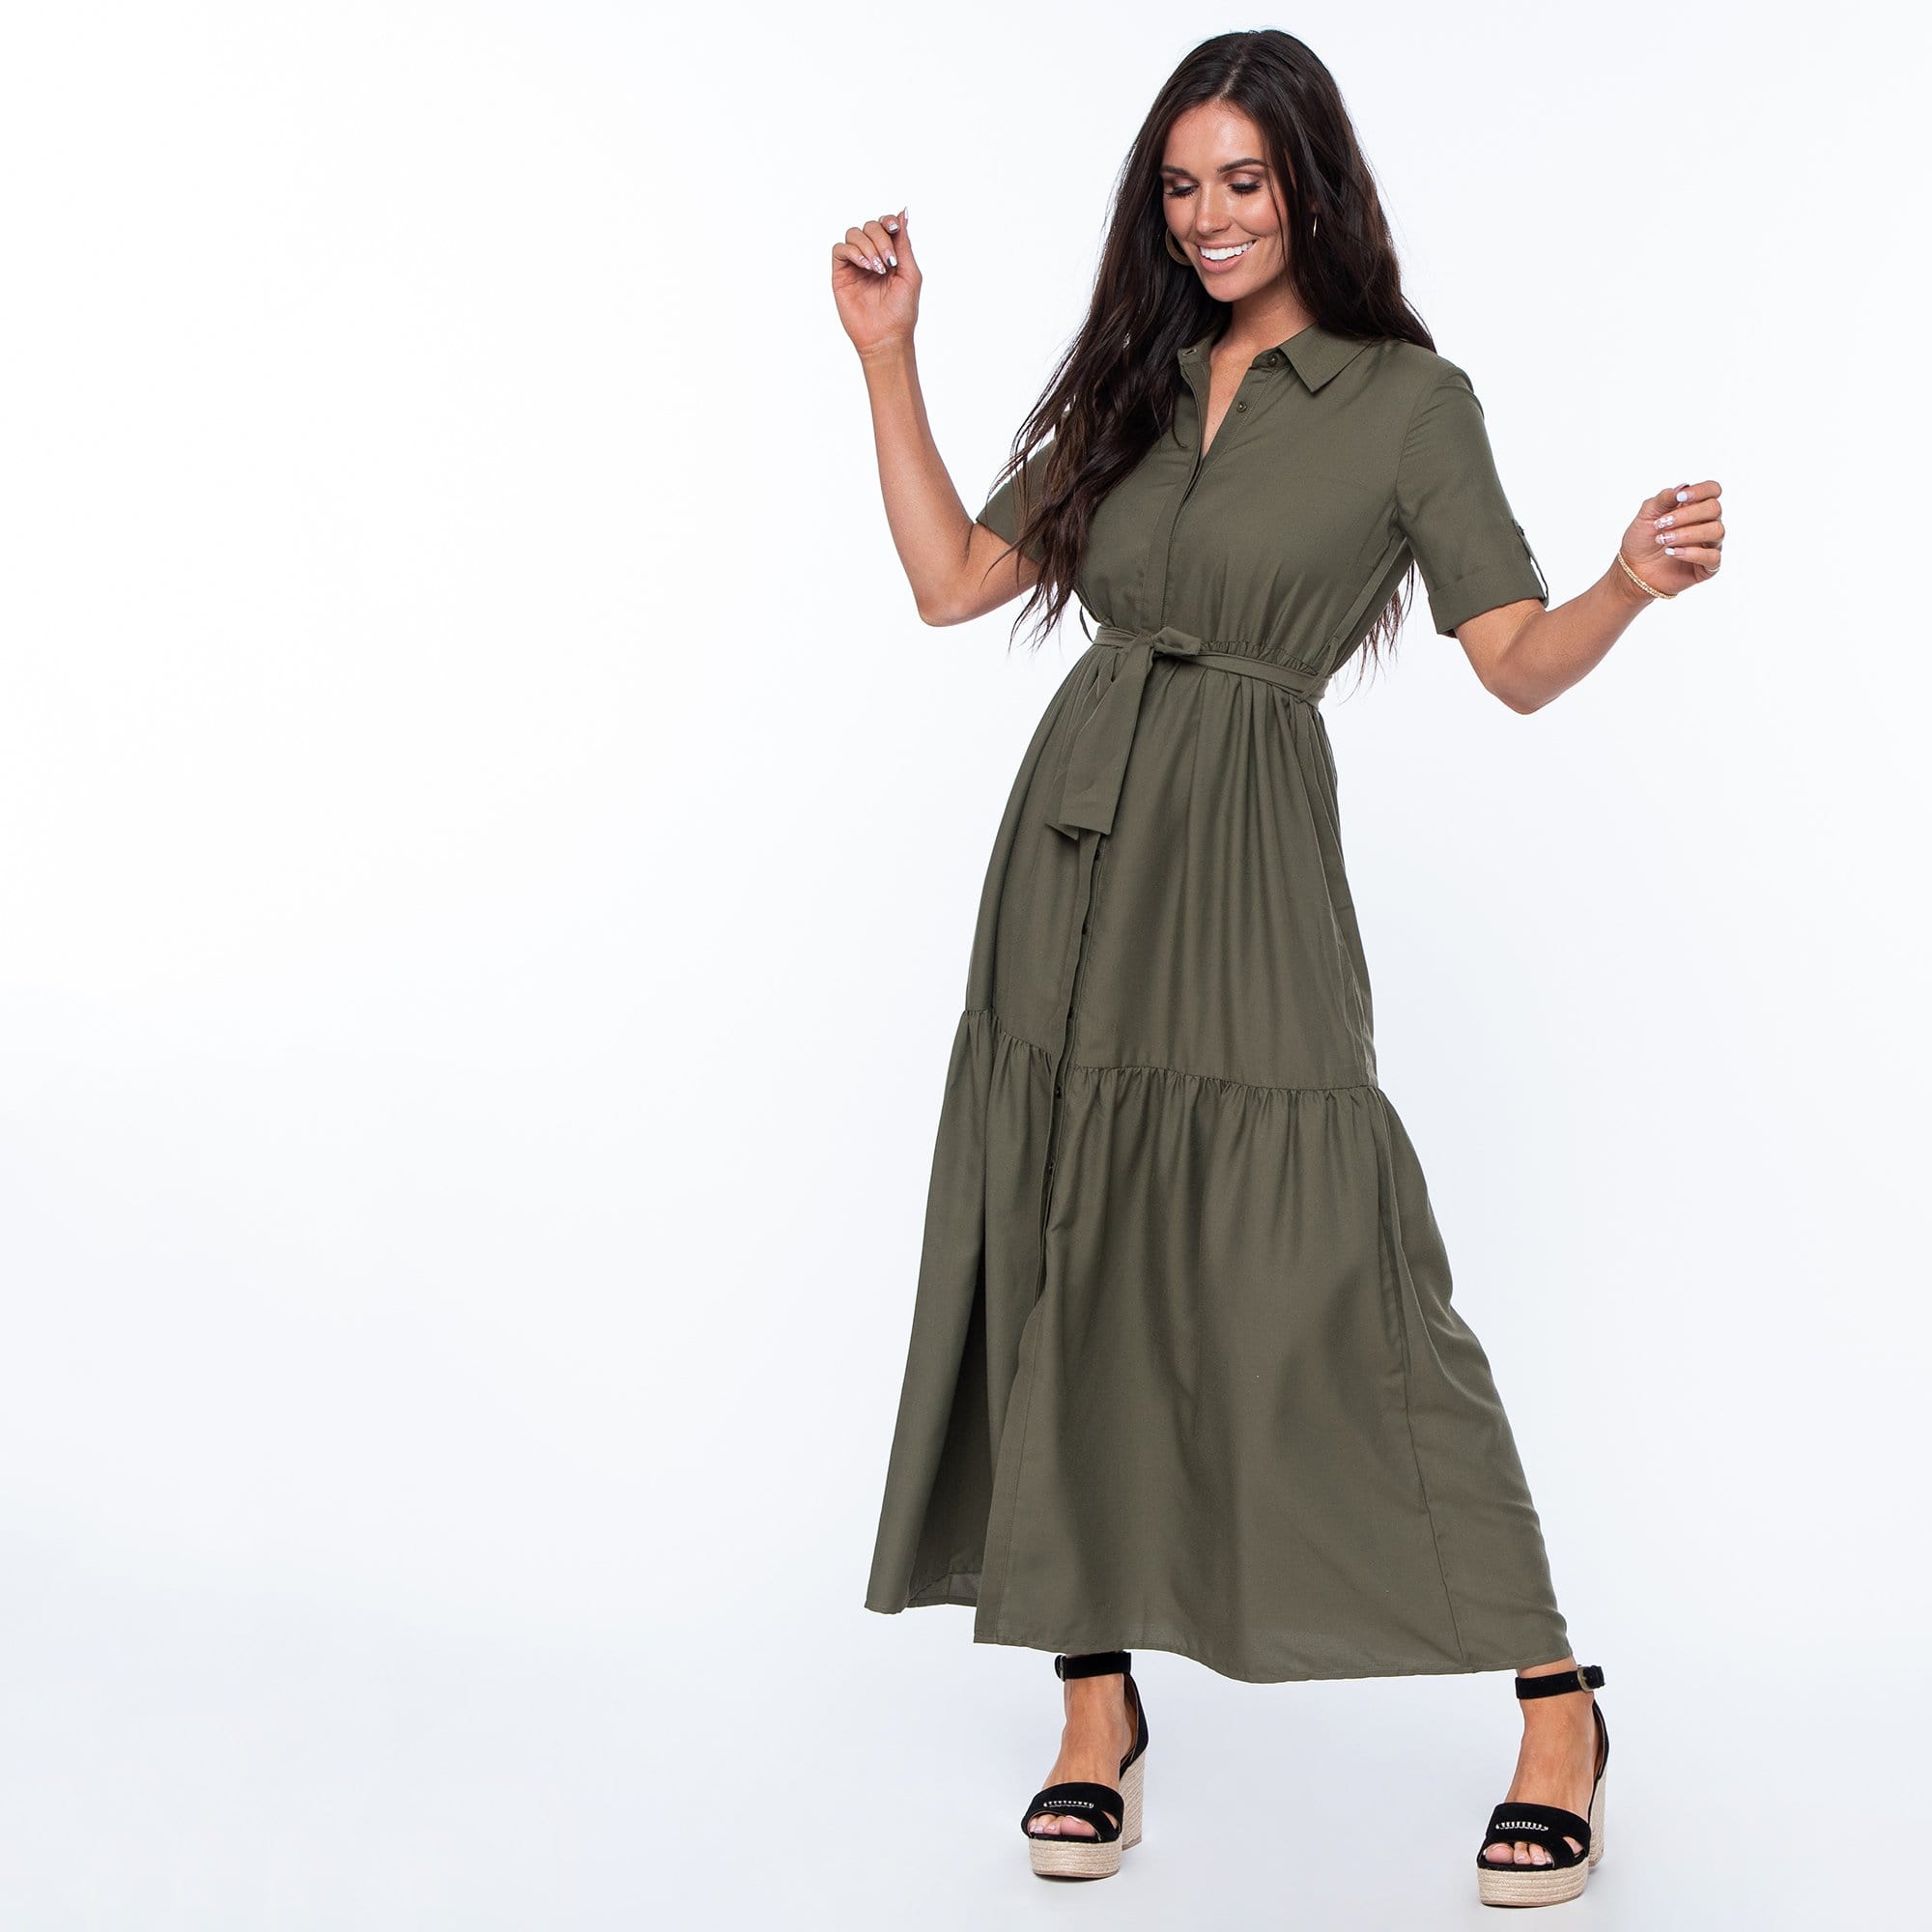 Belted Maxi Dress with Built-In Bra - Soma